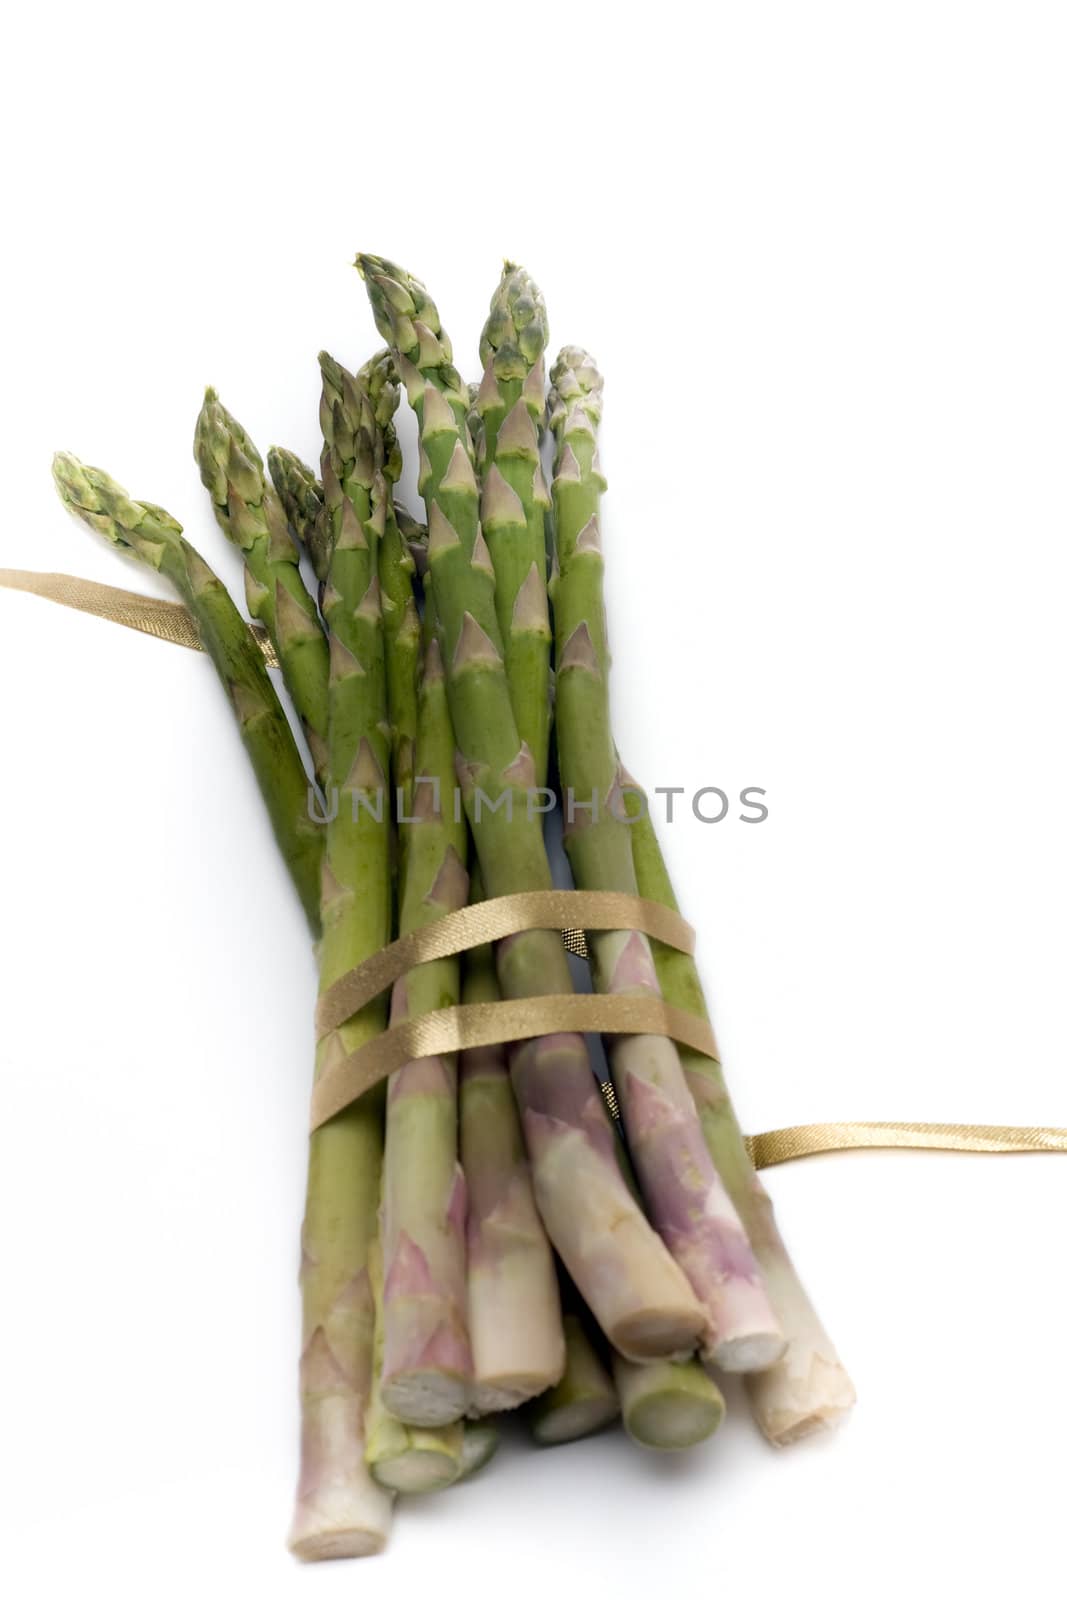 A bunch of asparagus, tied with gold ribbon, isolated on white.